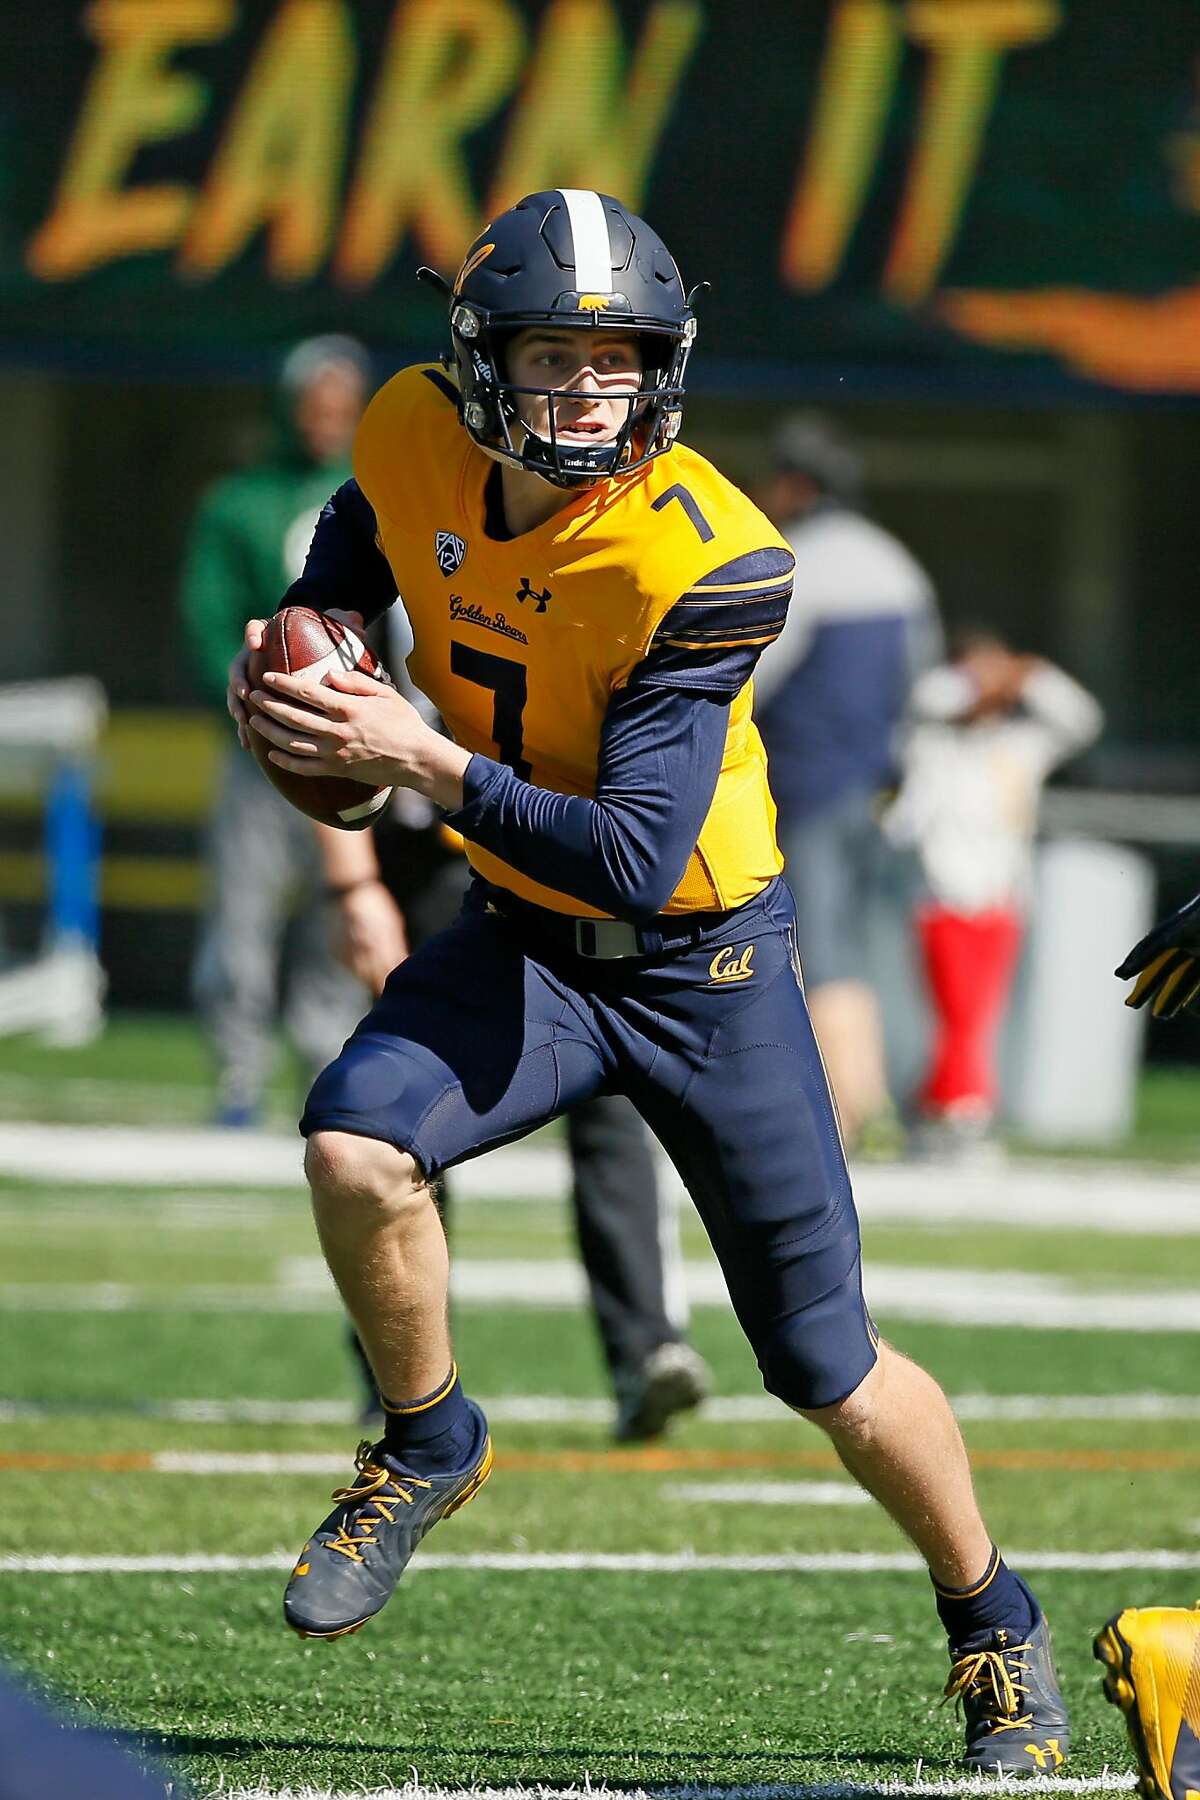 California Golden Bears quarterback Chase Garbers (7) keeps the ball on a read-option play during the annual Cal Spring Football Game at California Memorial Stadium on Saturday, March 16, 2019, in Berkeley, Calif.